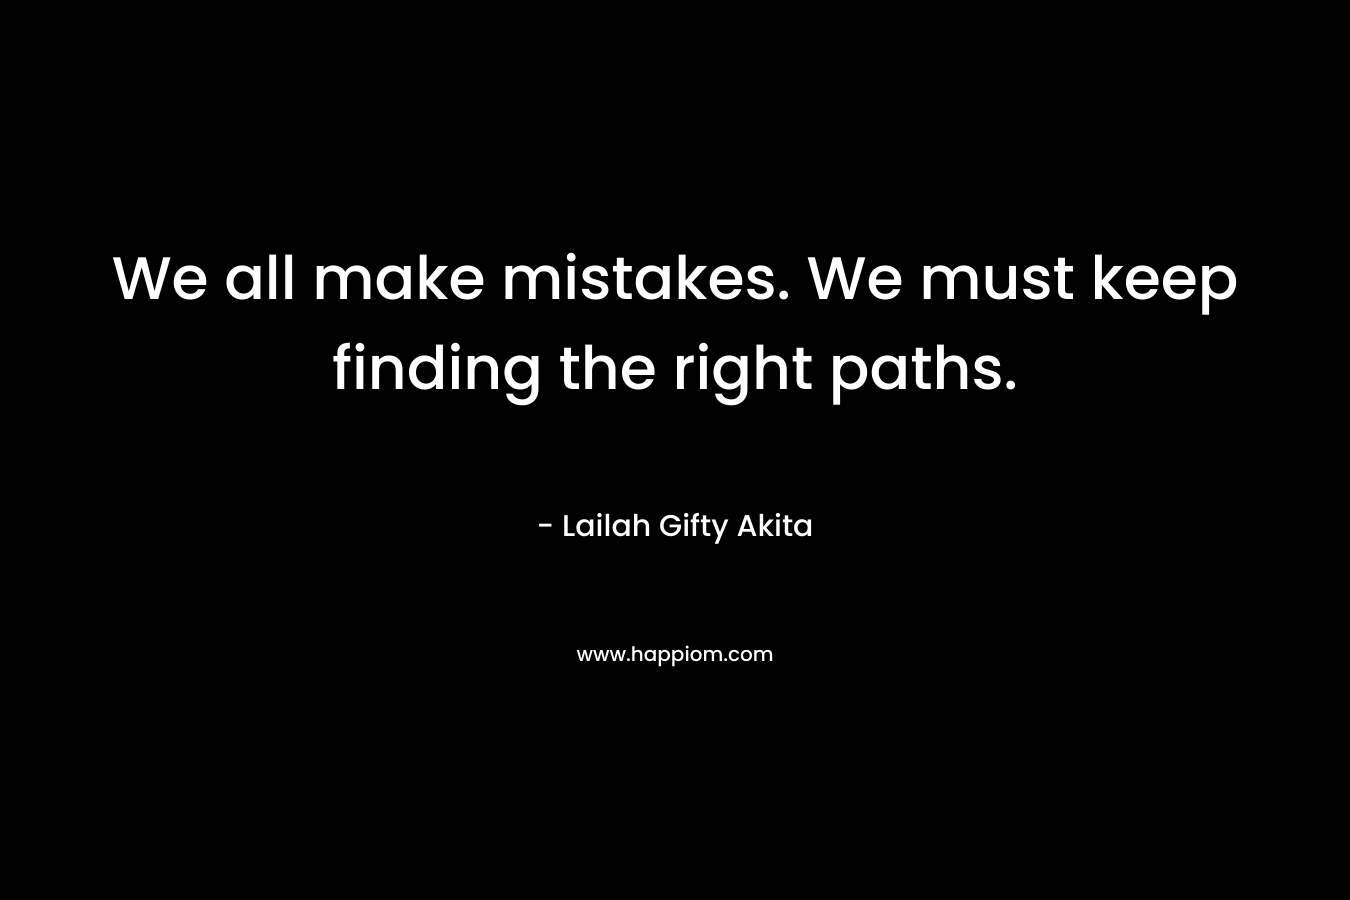 We all make mistakes. We must keep finding the right paths.